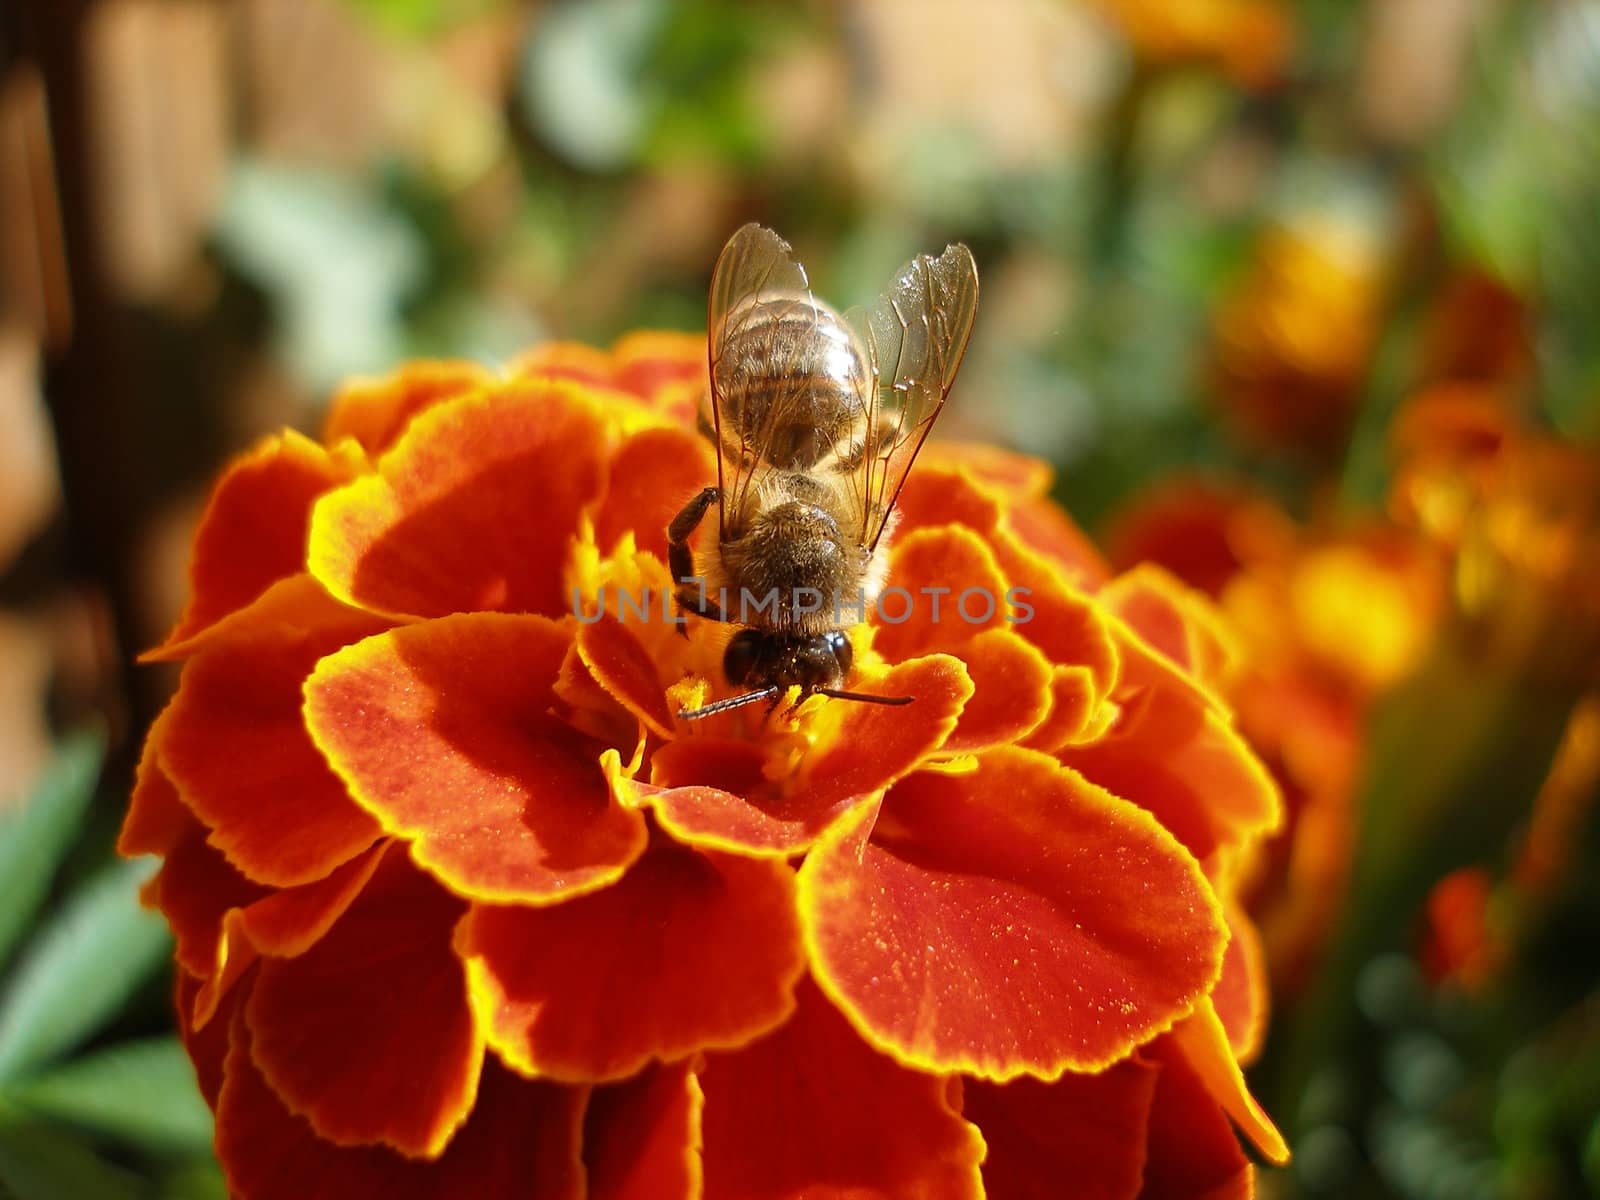 the small amusing bee sits on a flower and puts nectar